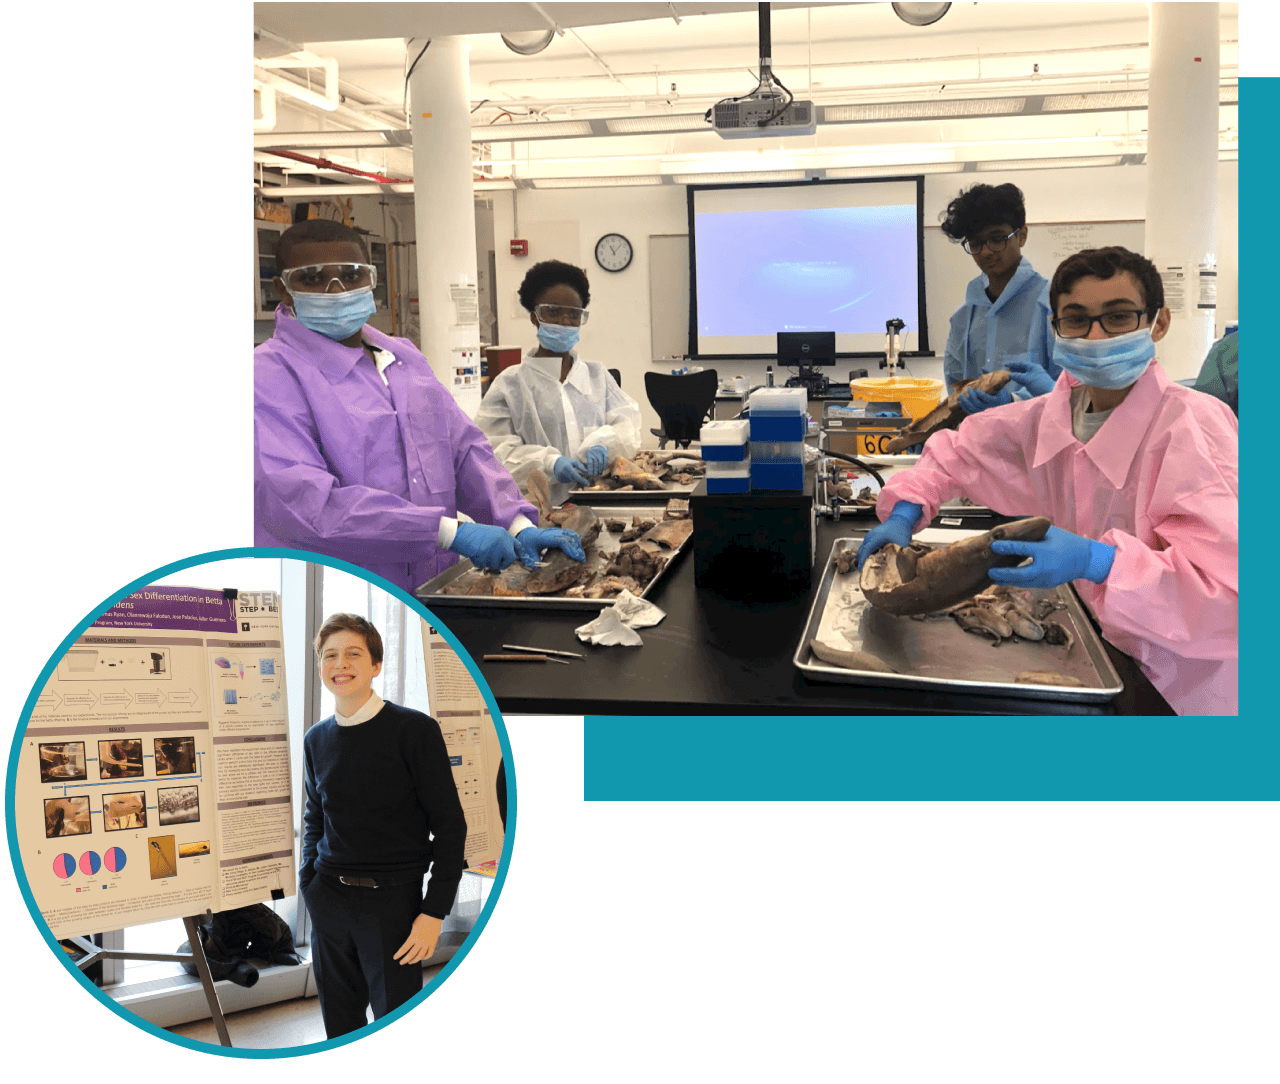 A collage of two images: 1) Students wearing protective equipment and hoping lab specimens in a classroom. 2) A student standing next to their research presentation.